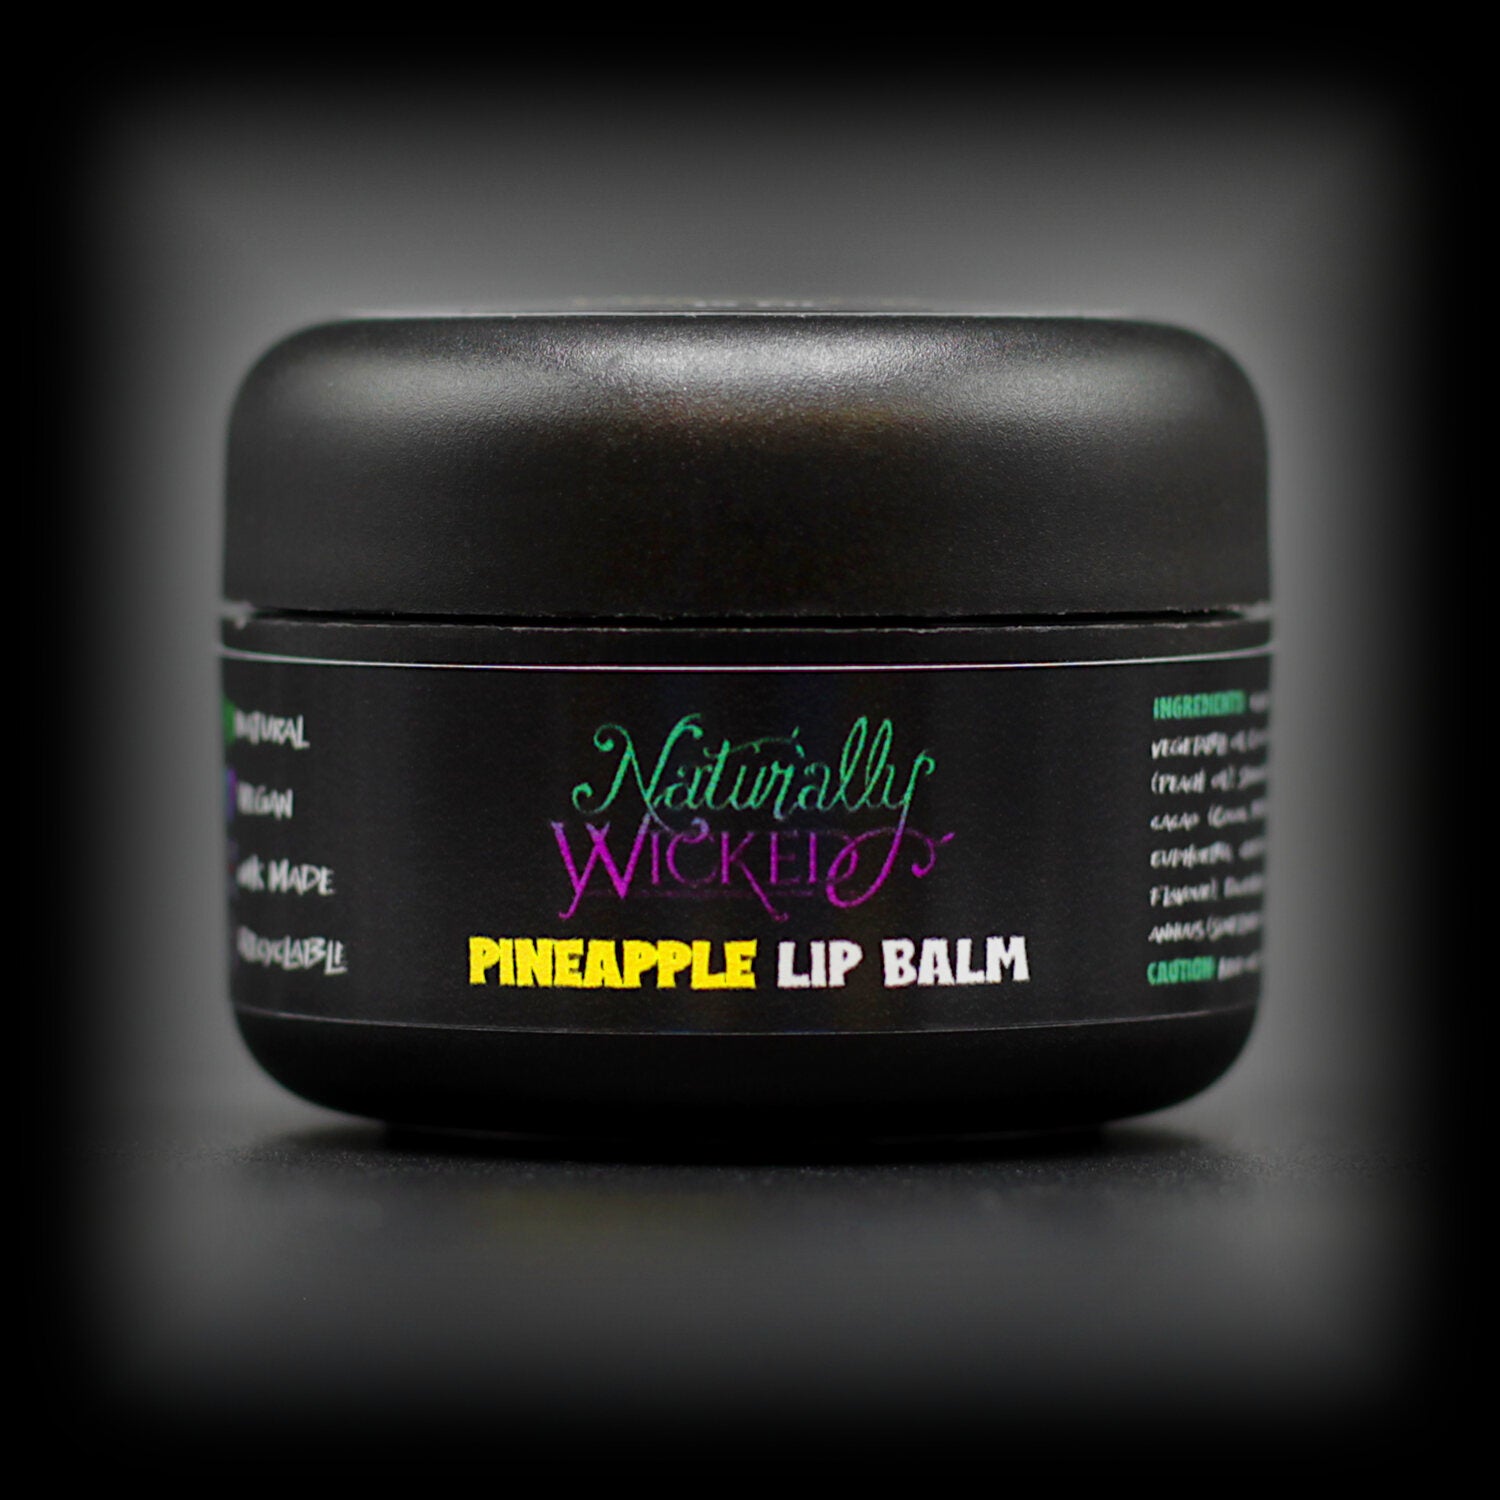 Naturally Wicked Pineapple Lip Balm In Luxury Black Compact Gift Sized Container